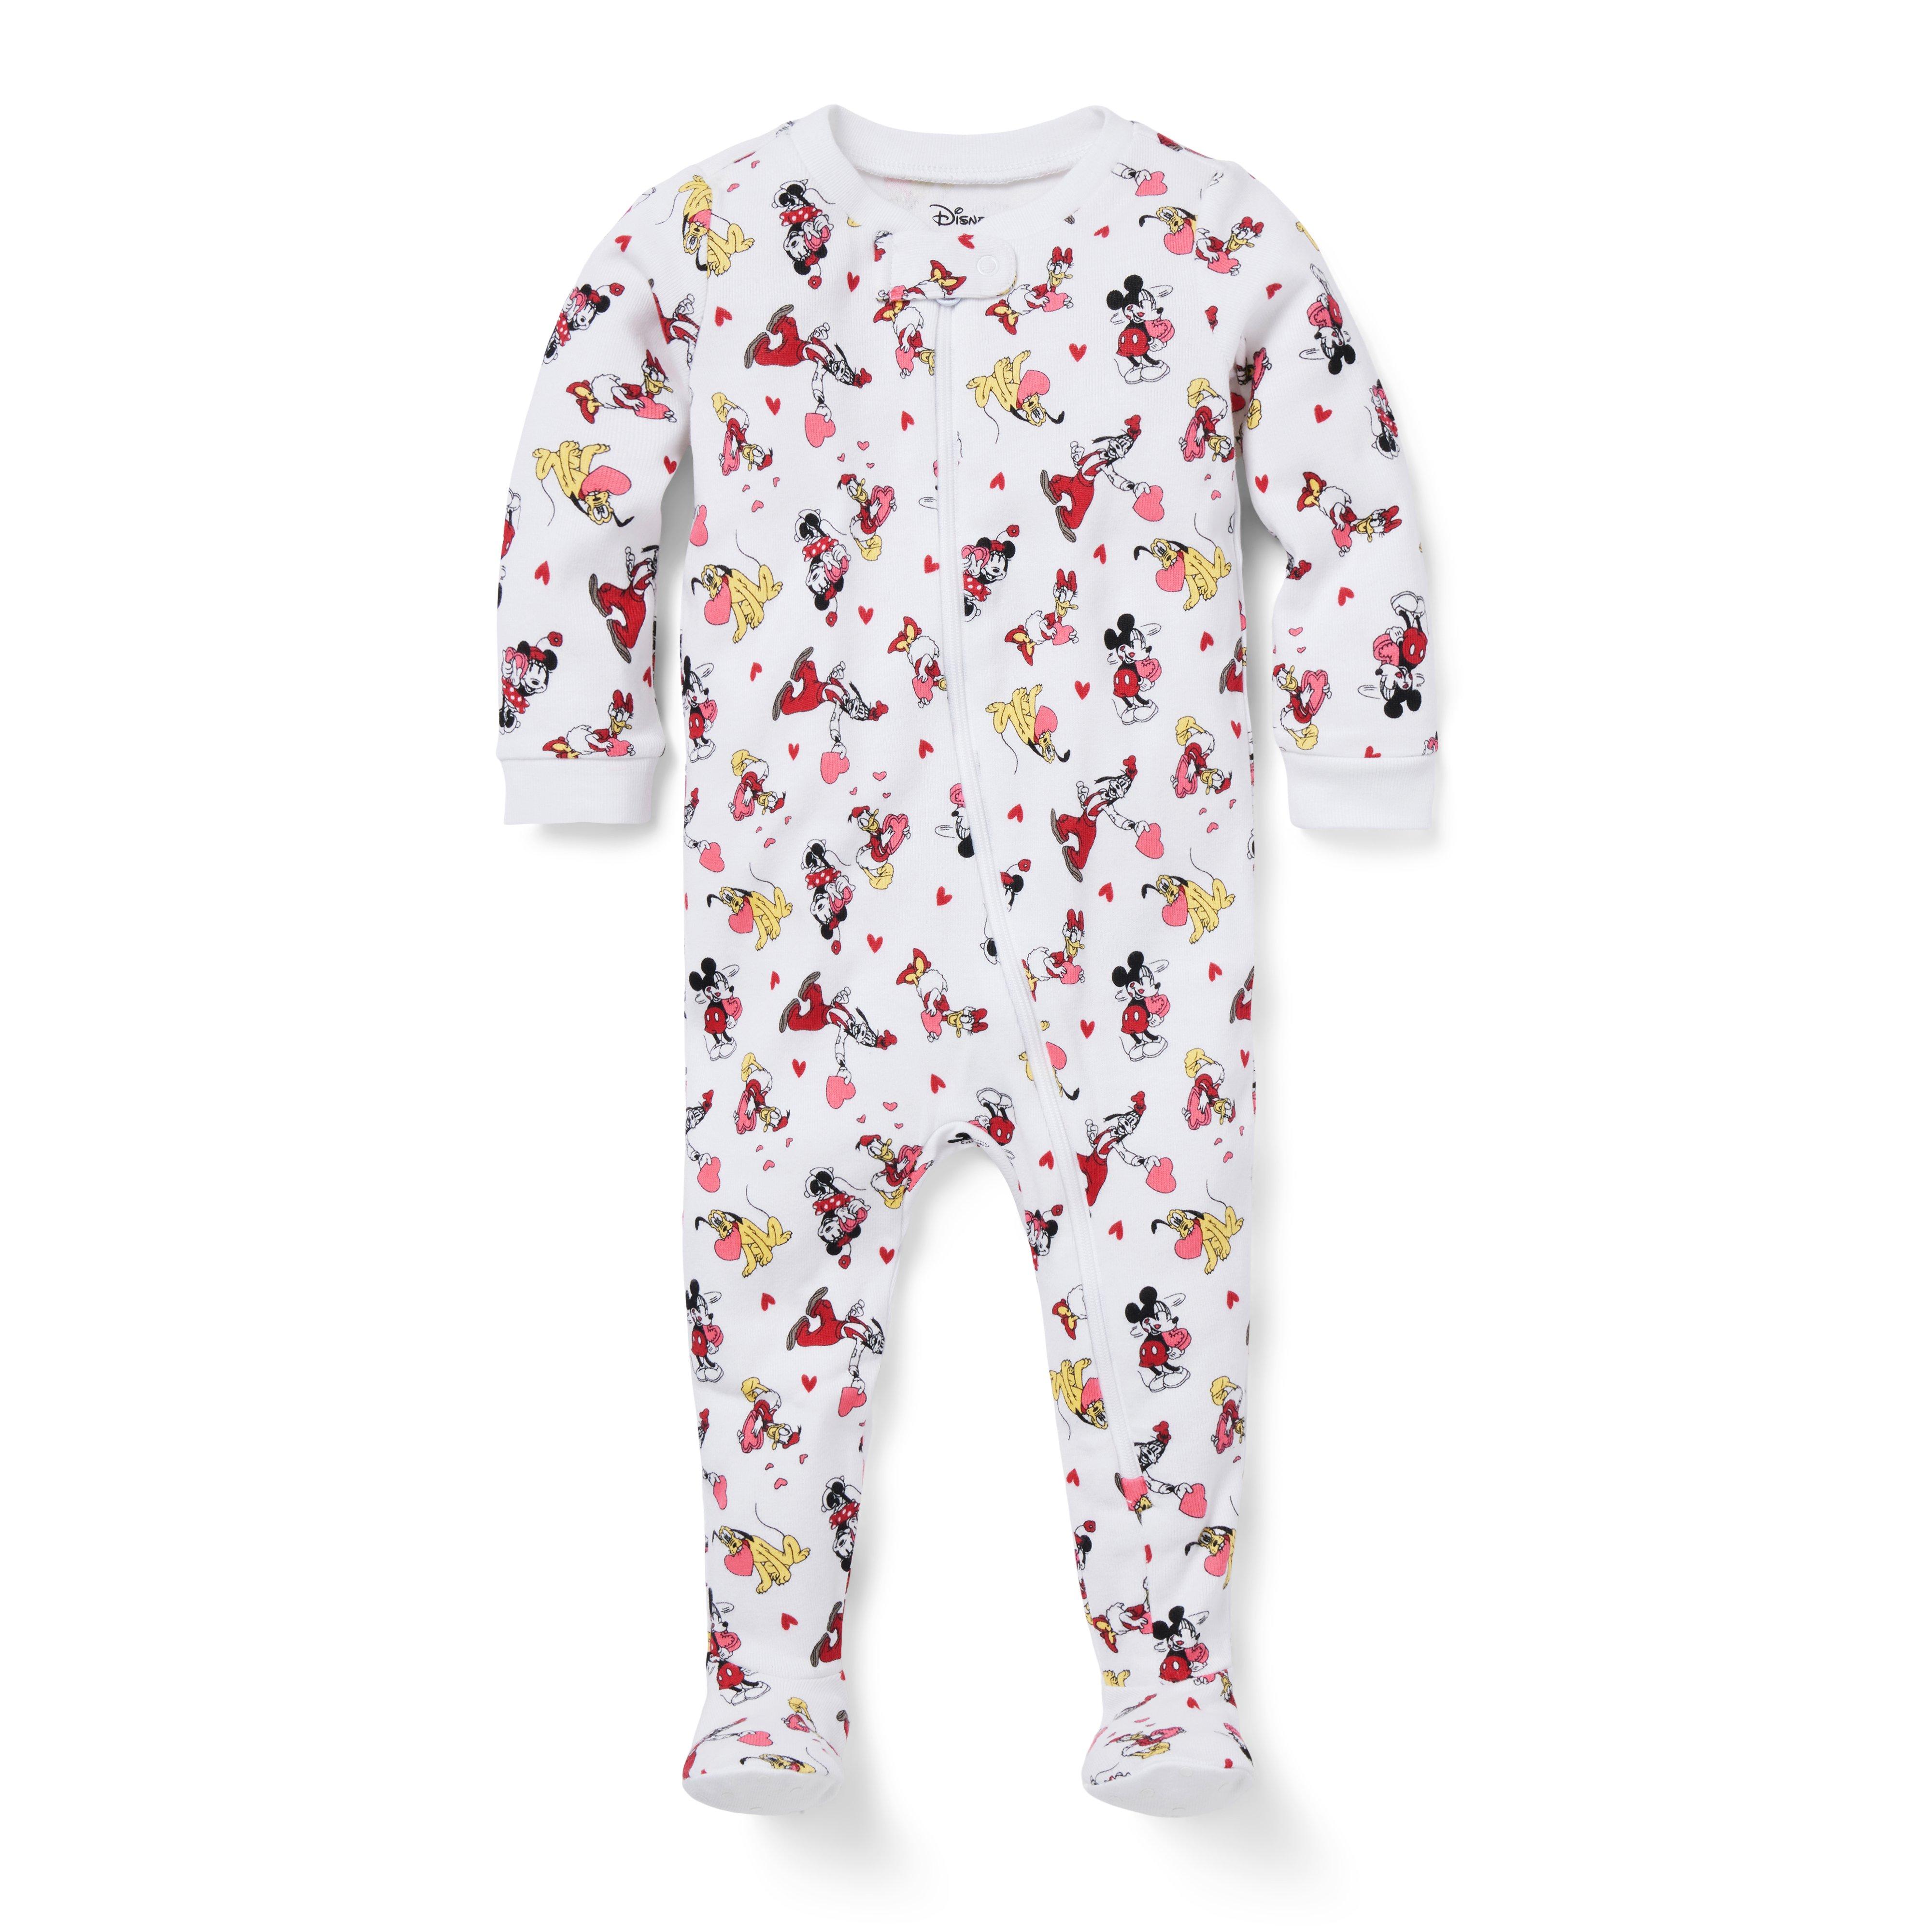 Baby Good Night Footed Pajamas in Disney Mickey Mouse Valentine